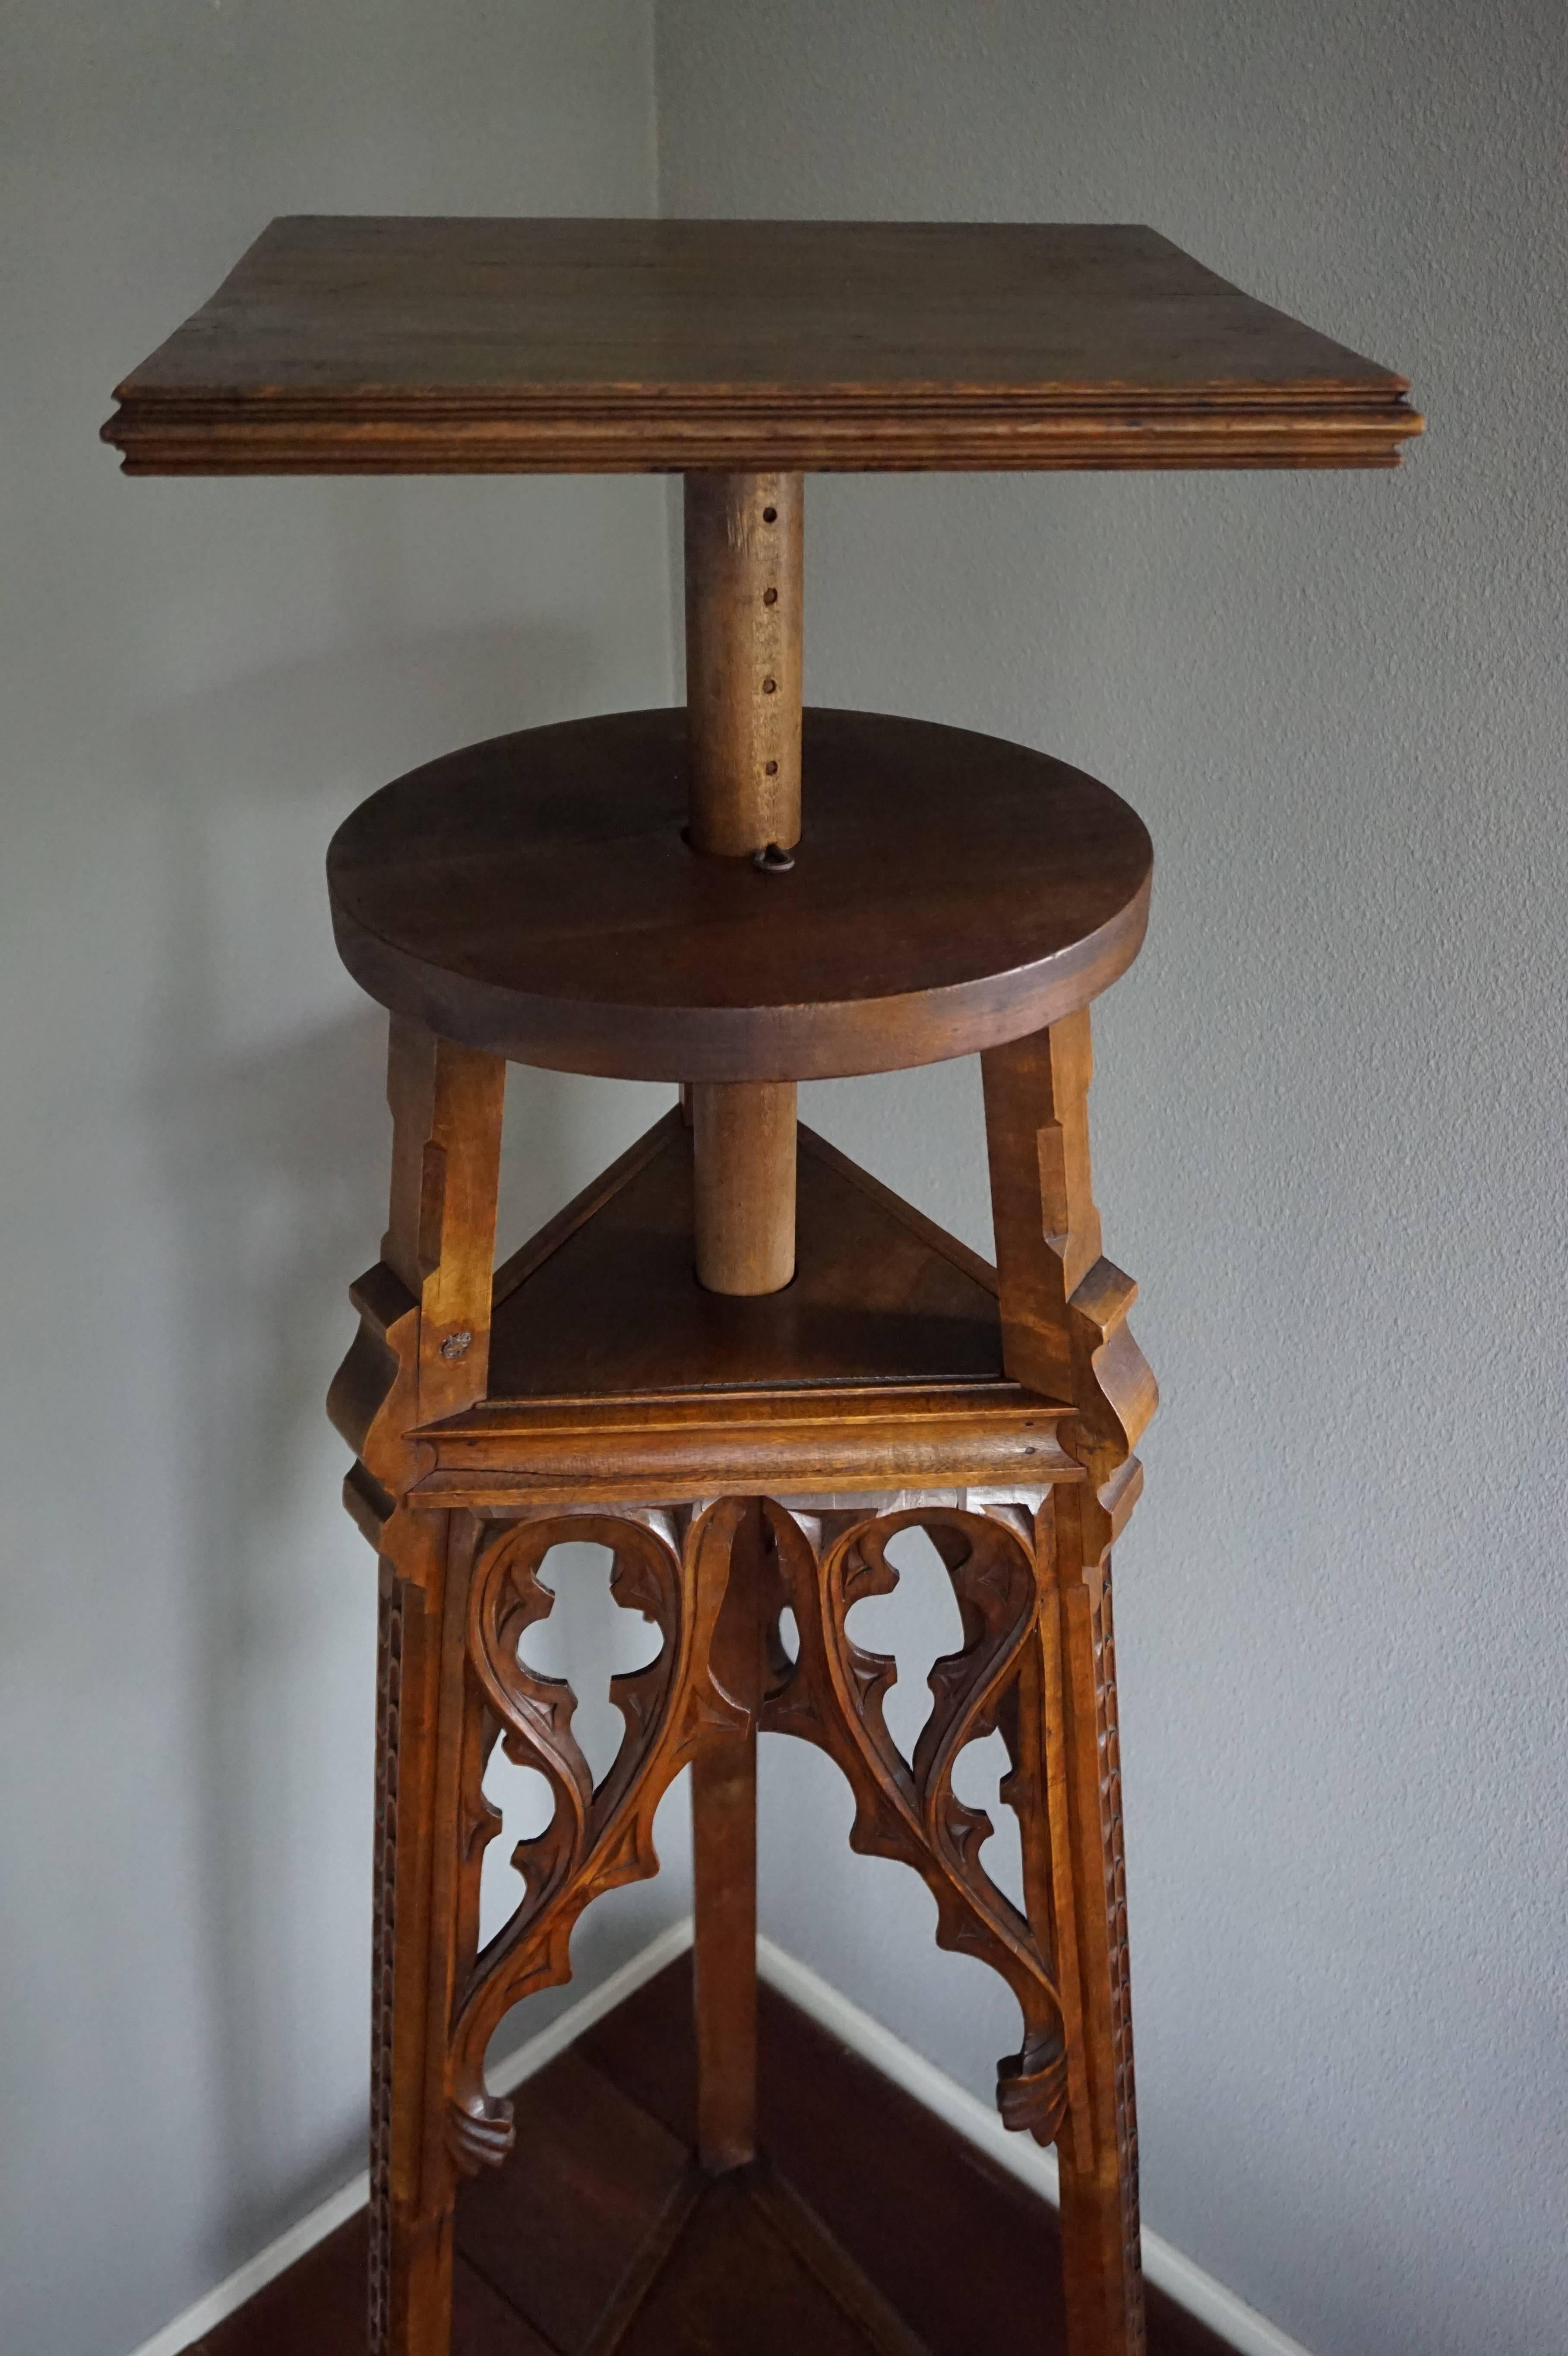 19th Century Antique and Large Hand Carved Gothic Revival Studio Work Easel / Sculpture Stand